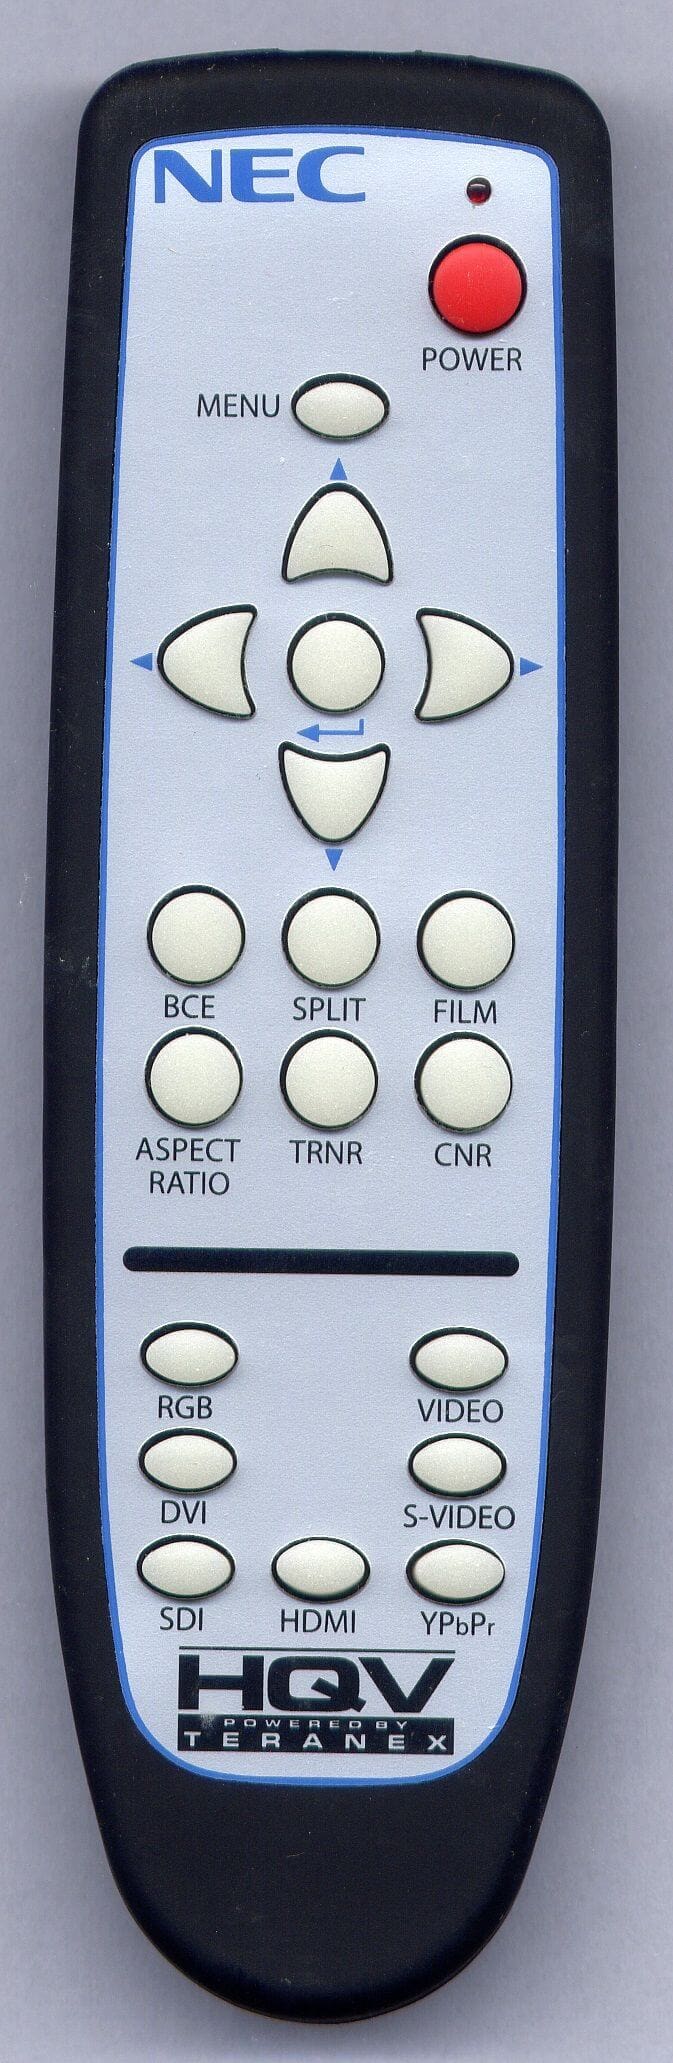 Soft touch paint on remote control